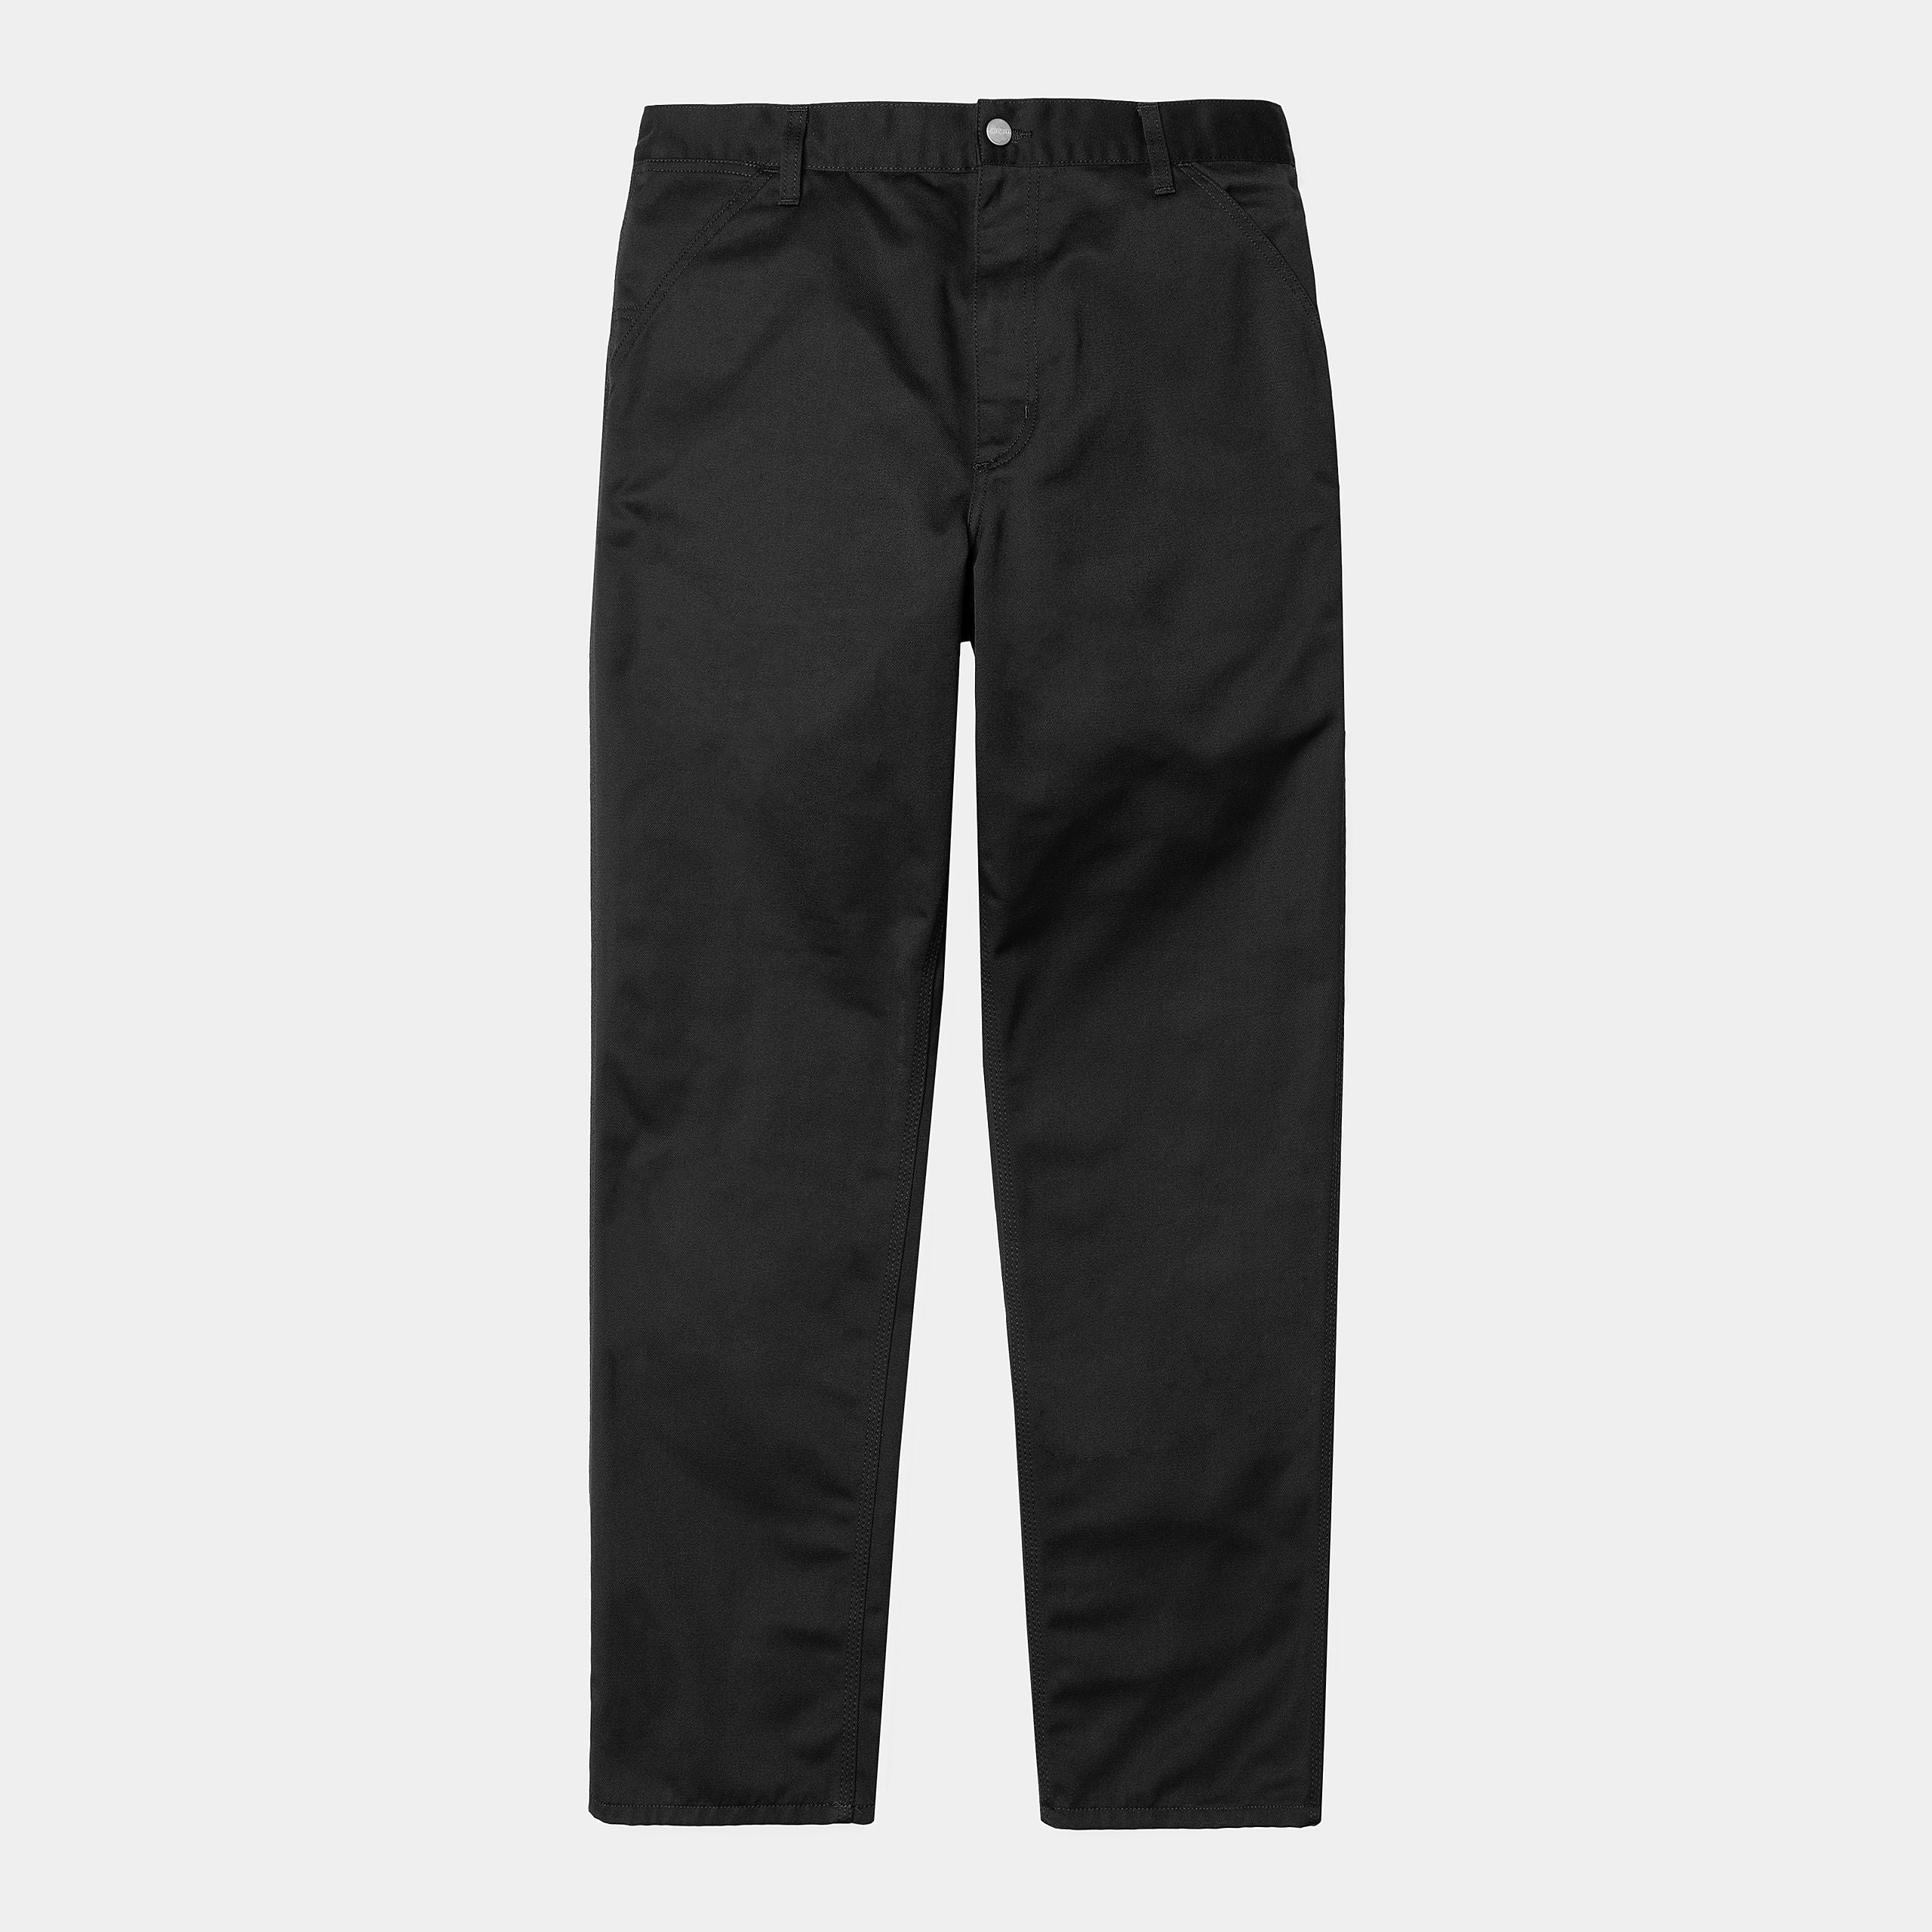 Carhartt Wip Simple Pant Polyester/cotton Denison Twill, 8.8 Oz Black Rinsed Uomo - 5